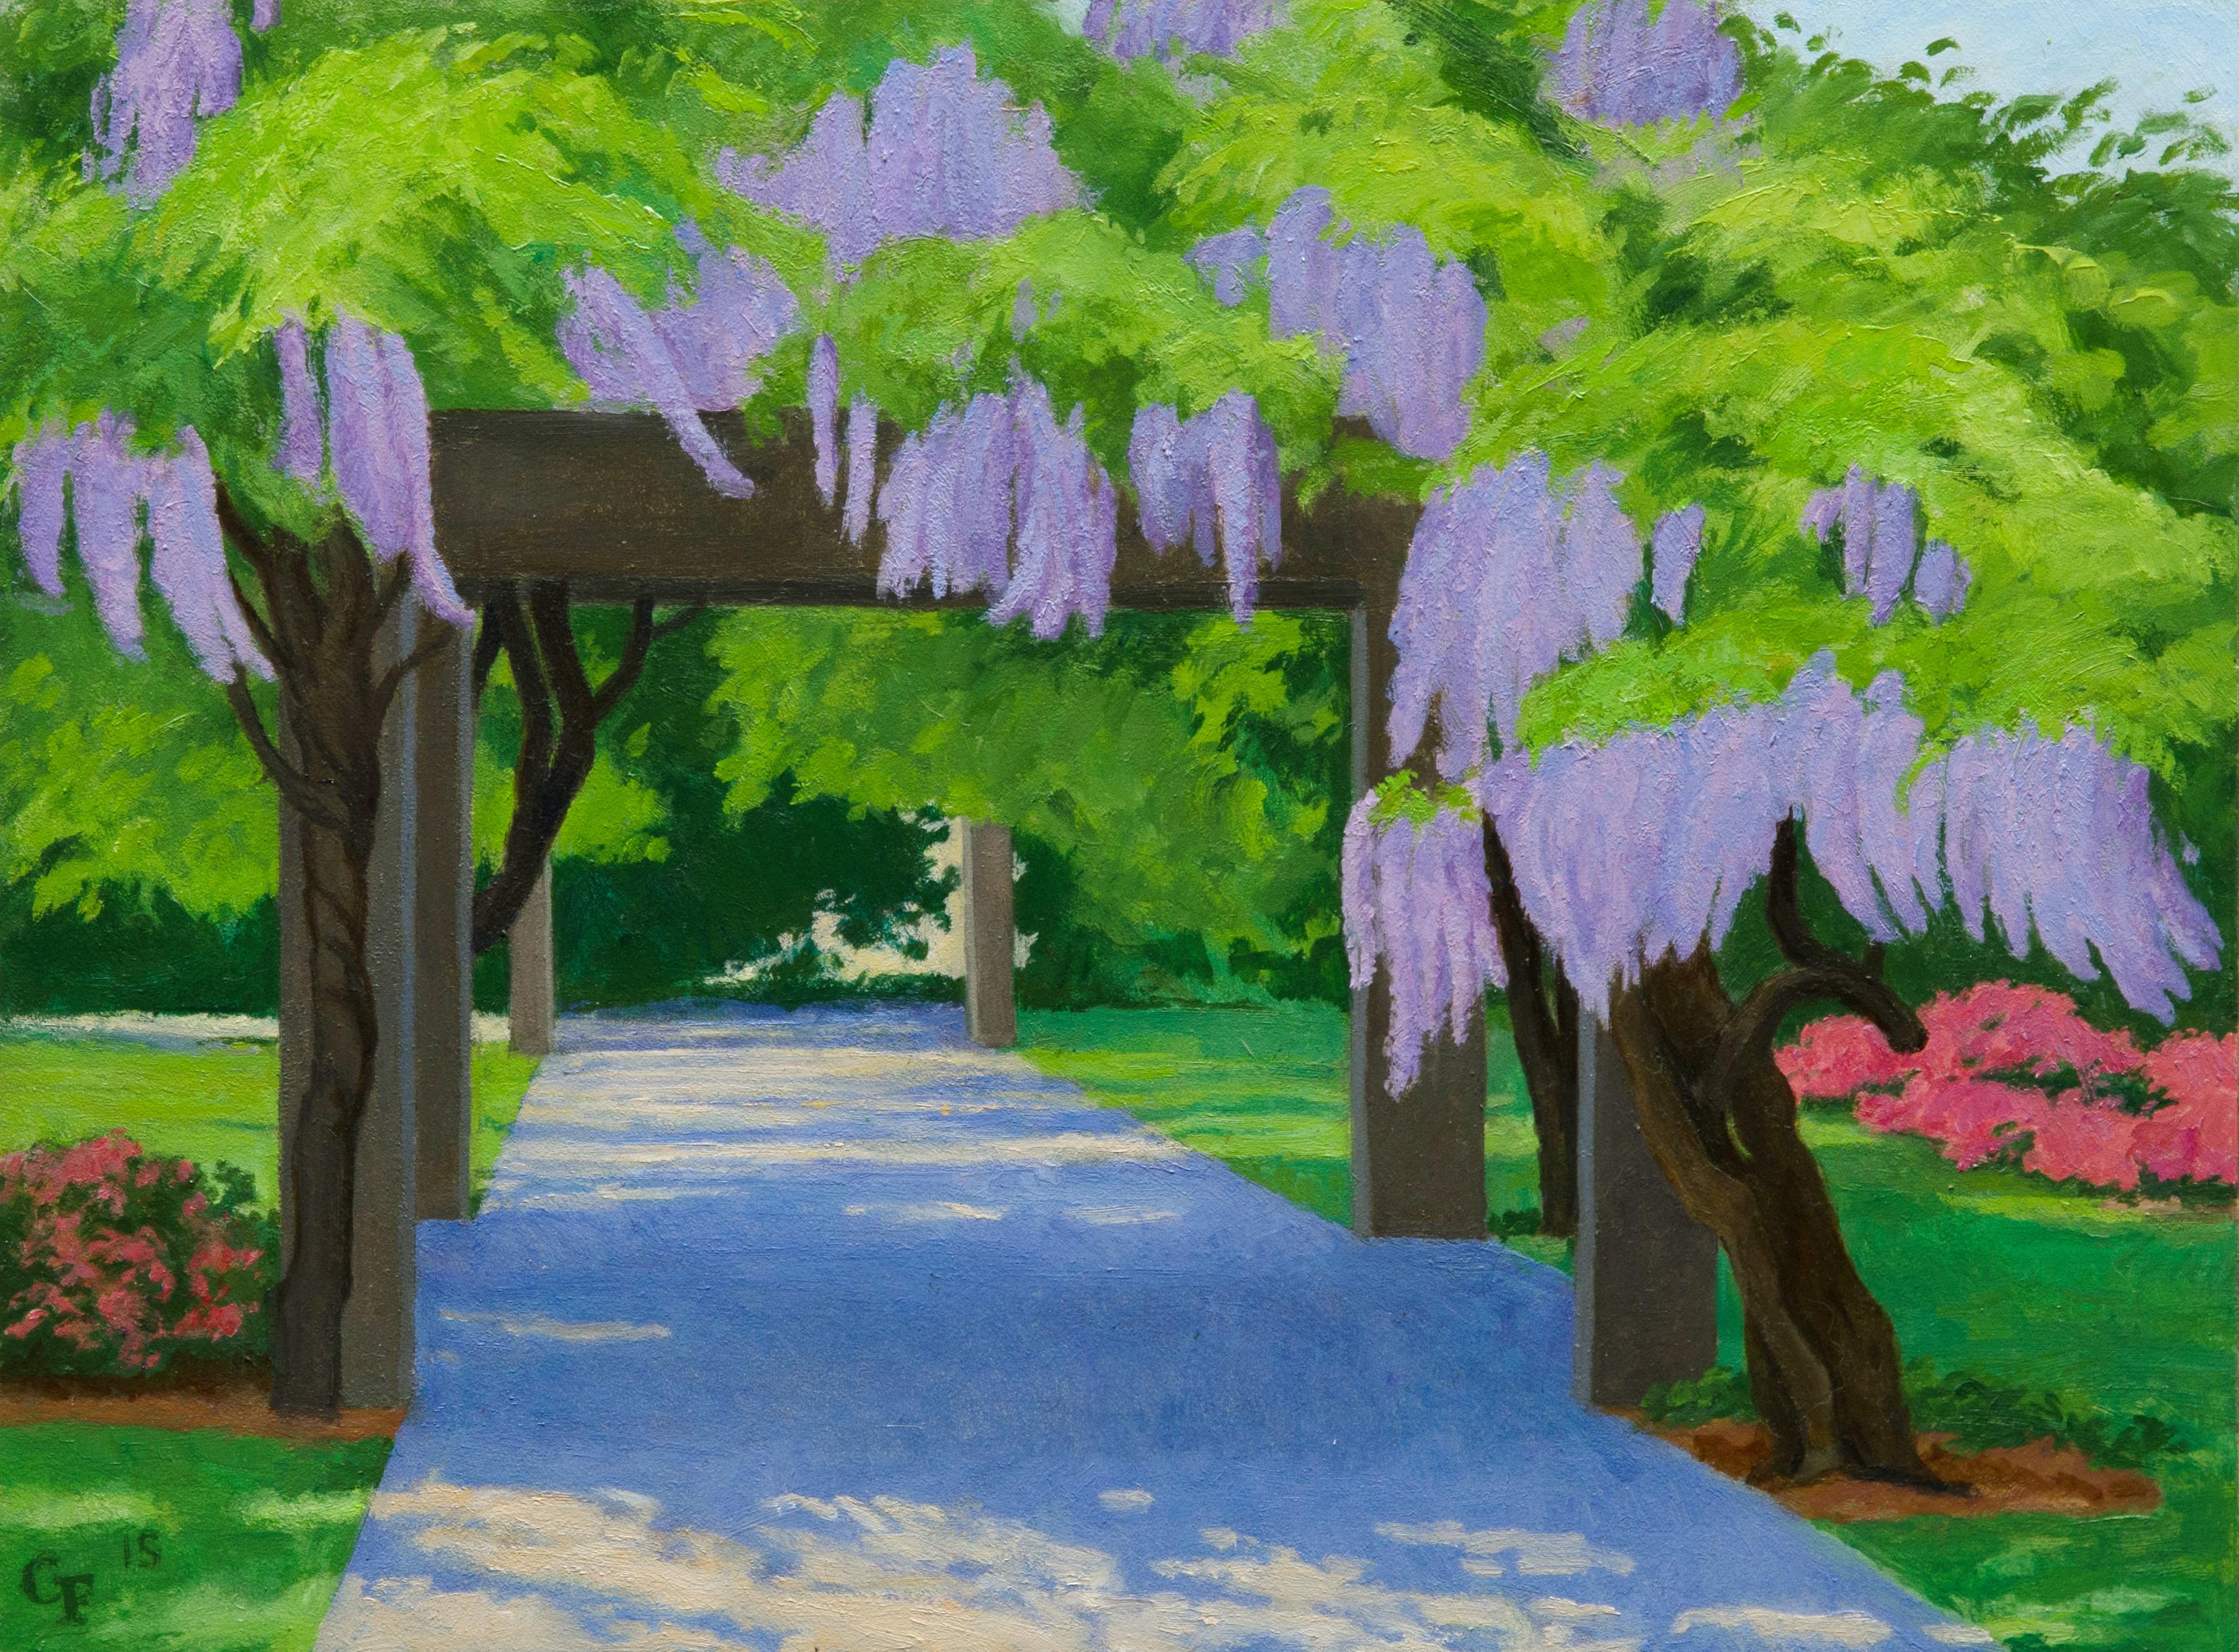 "Wisteria I" colorful garden path view, greens, sunlight, flowers